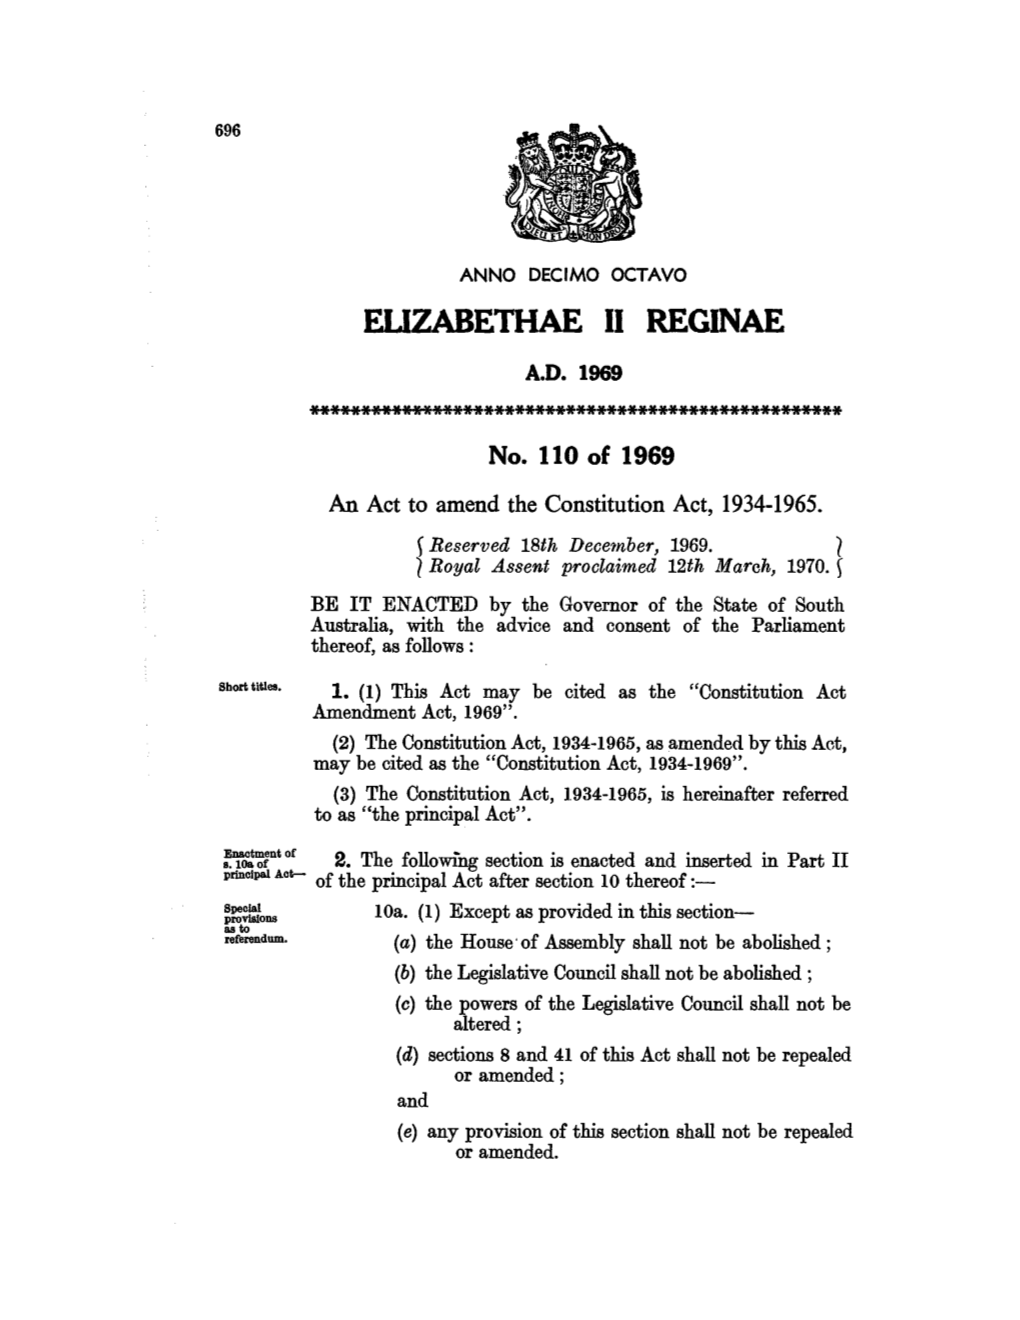 An Act to Amend the Constitution Act, 1934-1965